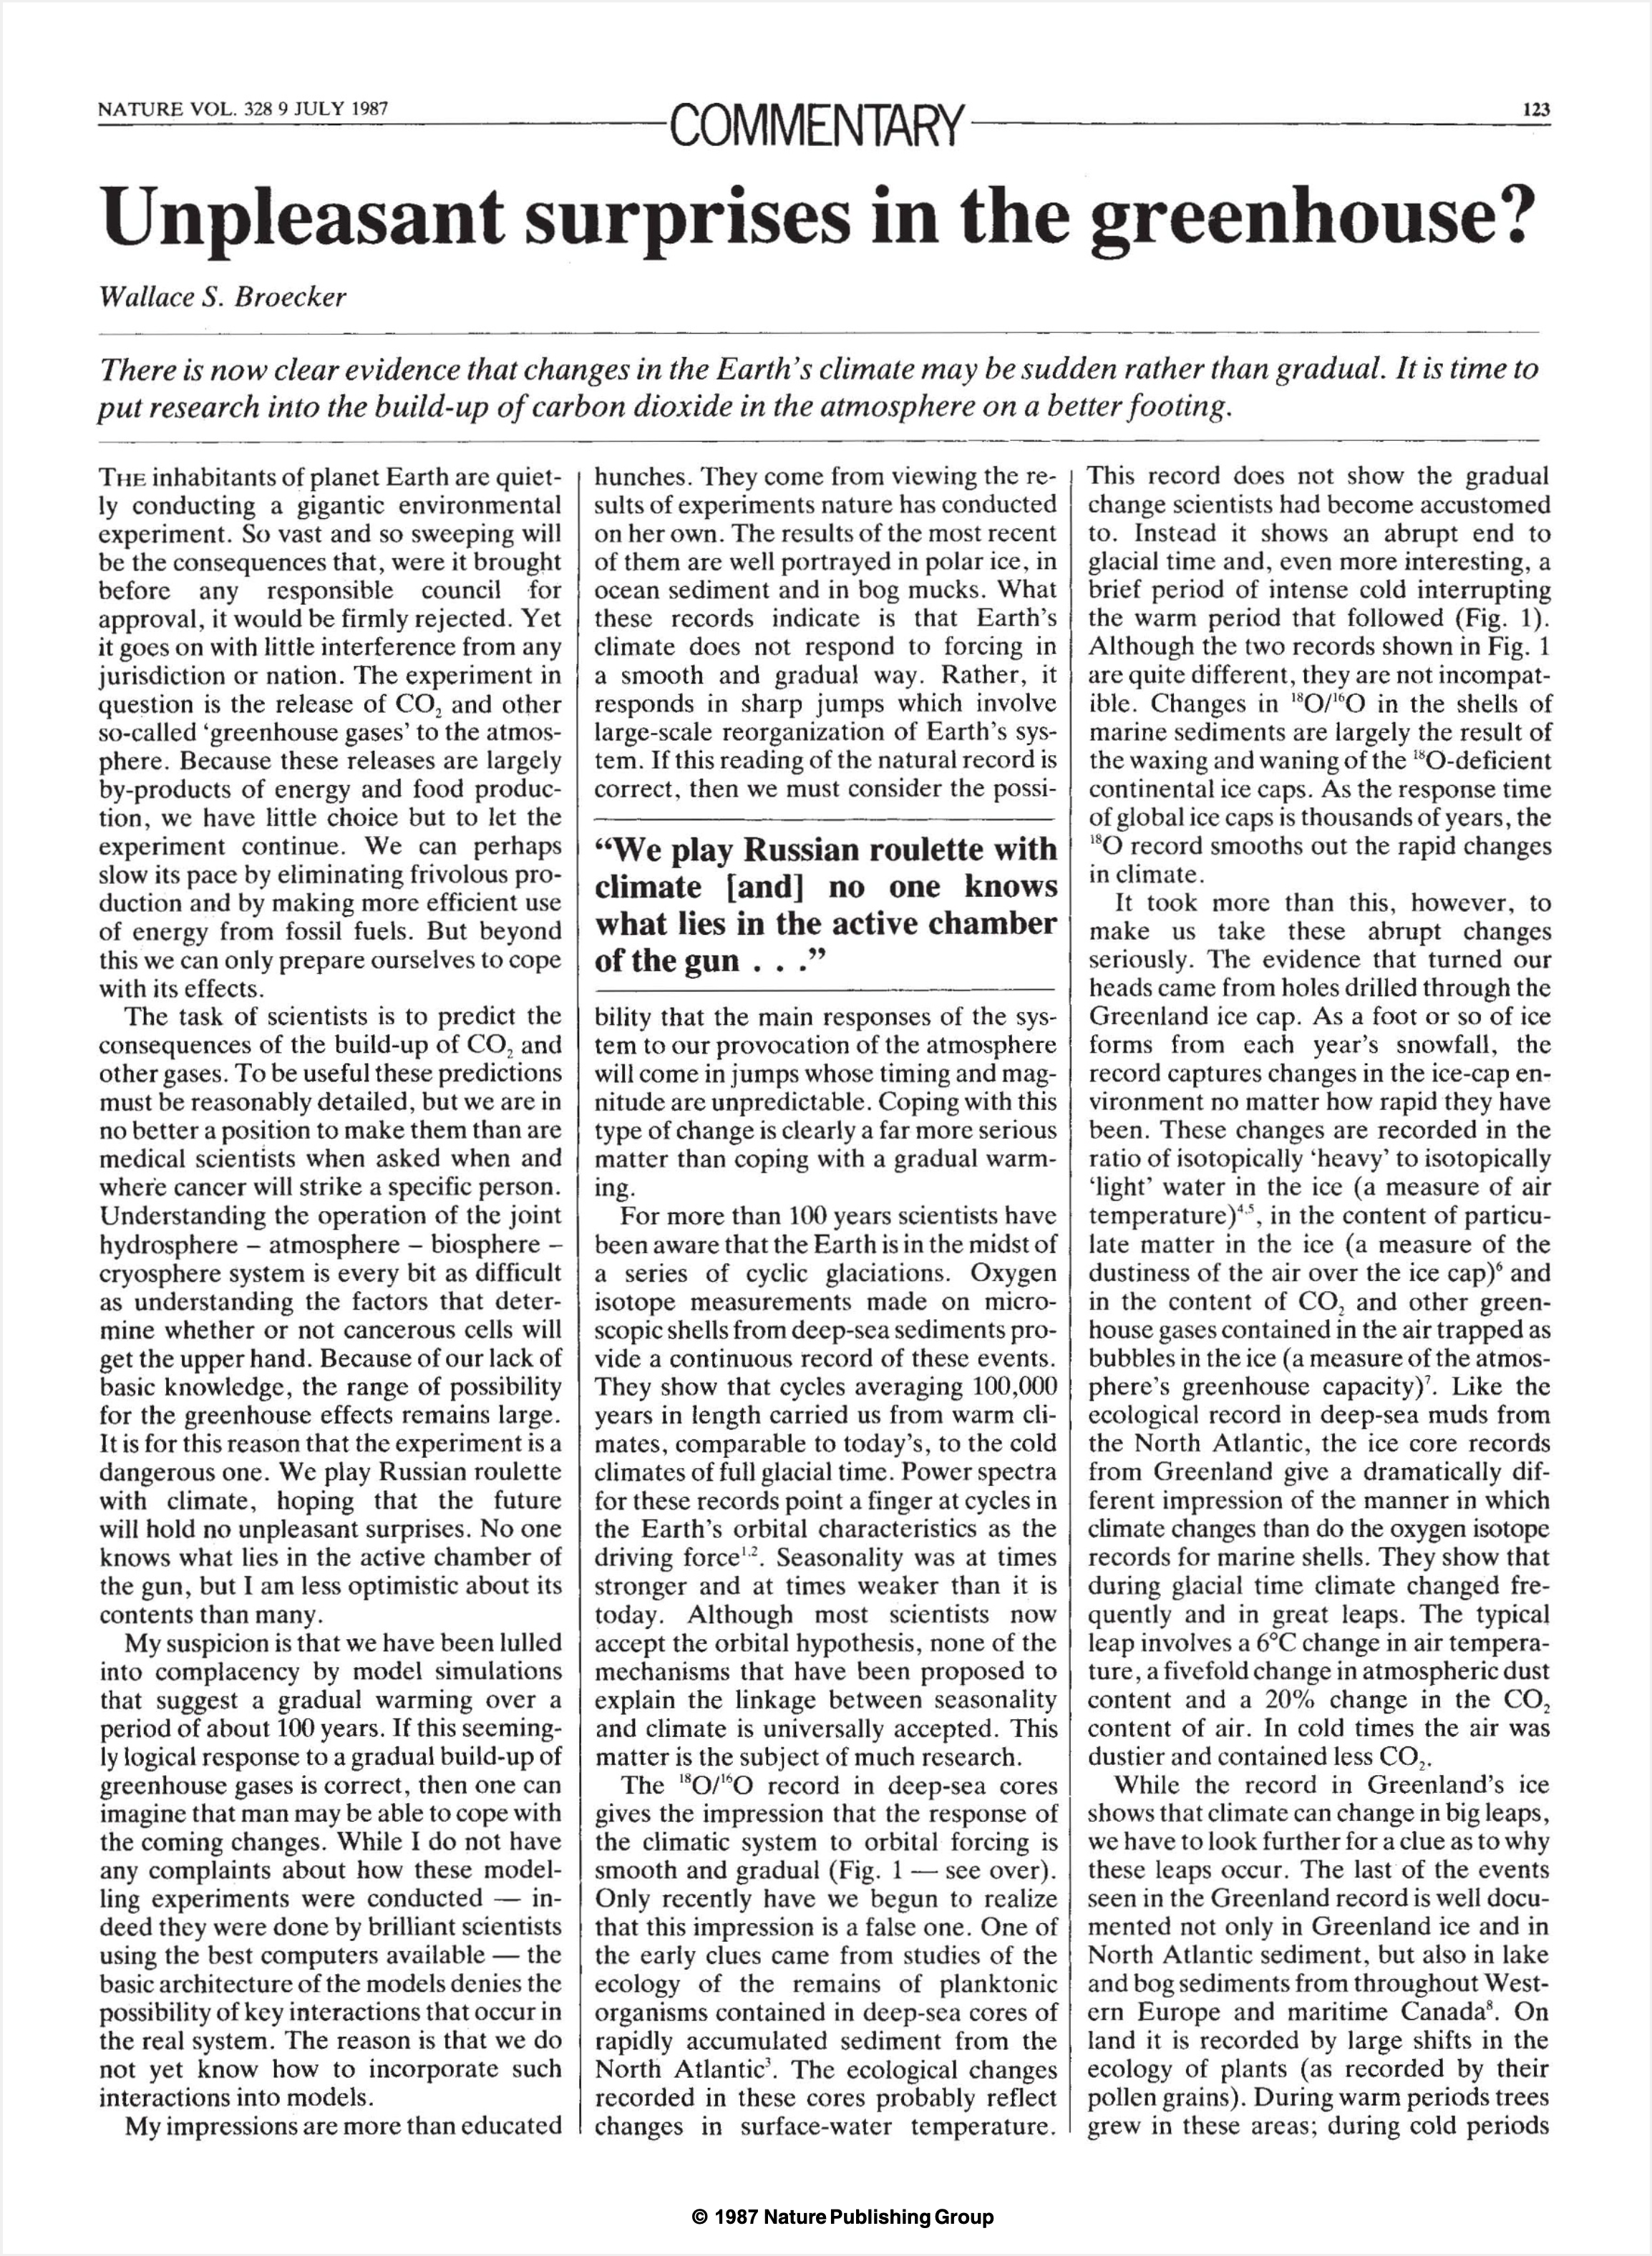 NATURE VOL. 328 9 JULY 1987 COMMENTARY Unpleasant surprises in the greenhouse? Wallace S. Broecker There is now clear evidence that changes in the Earth’s climate may be sudden rather than gradual. It is time to put research into the build-up of carbon <br />dioxide in the atmosphere on a better footing.